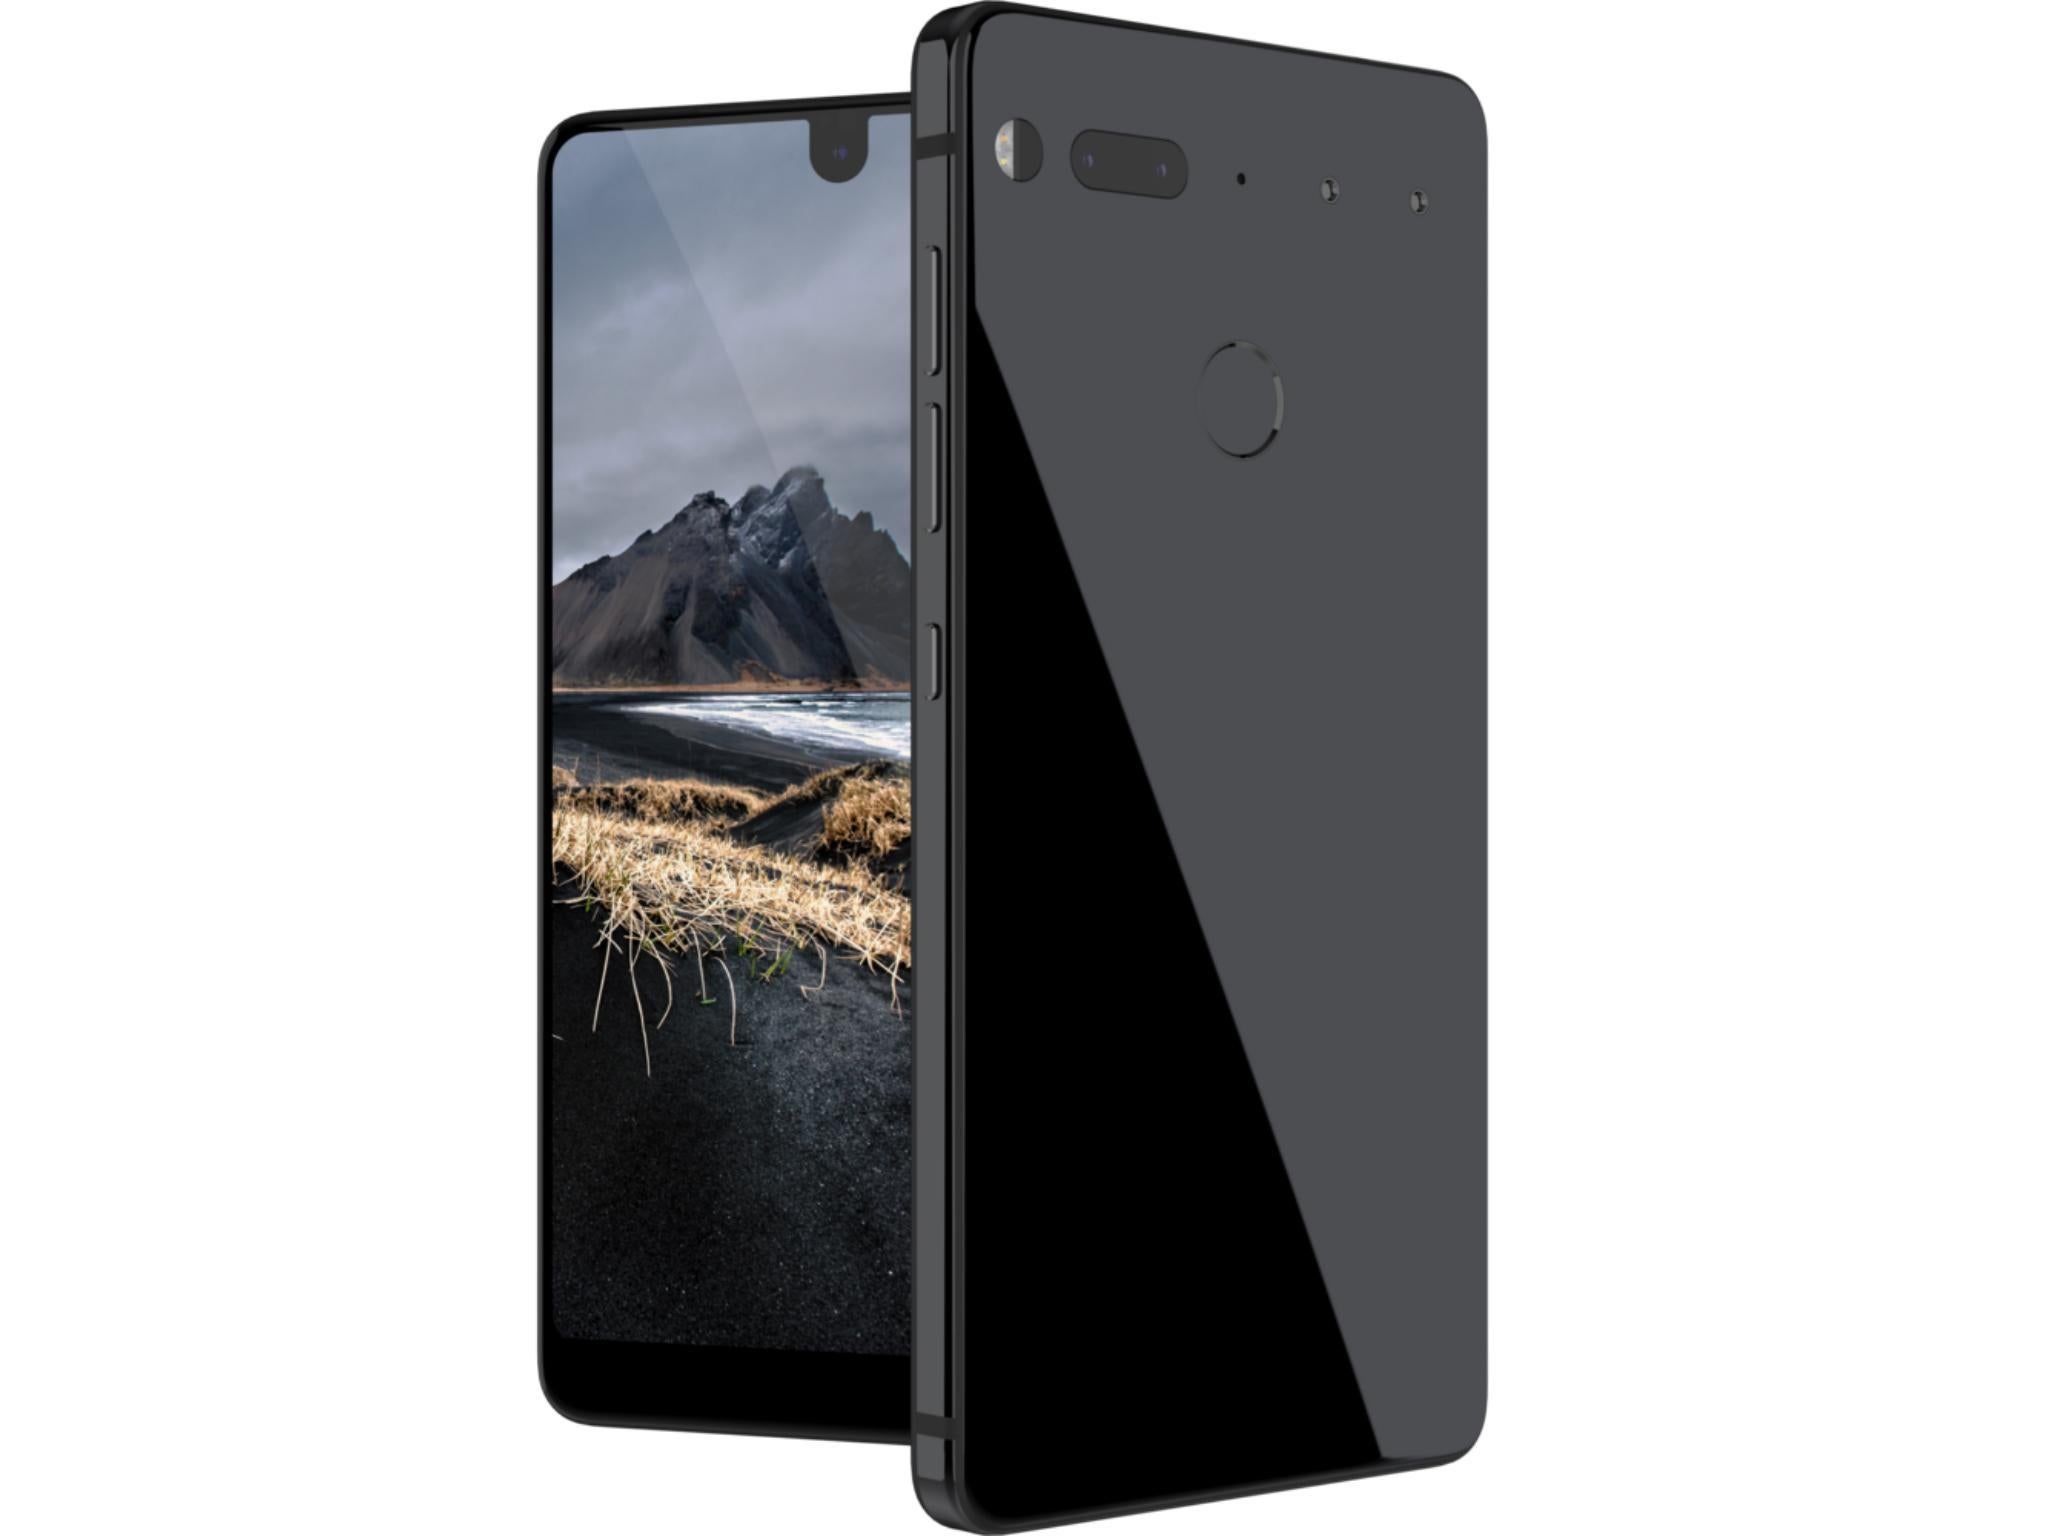 The Essential Phone is modular, meaning users will be able to clip accessories to it